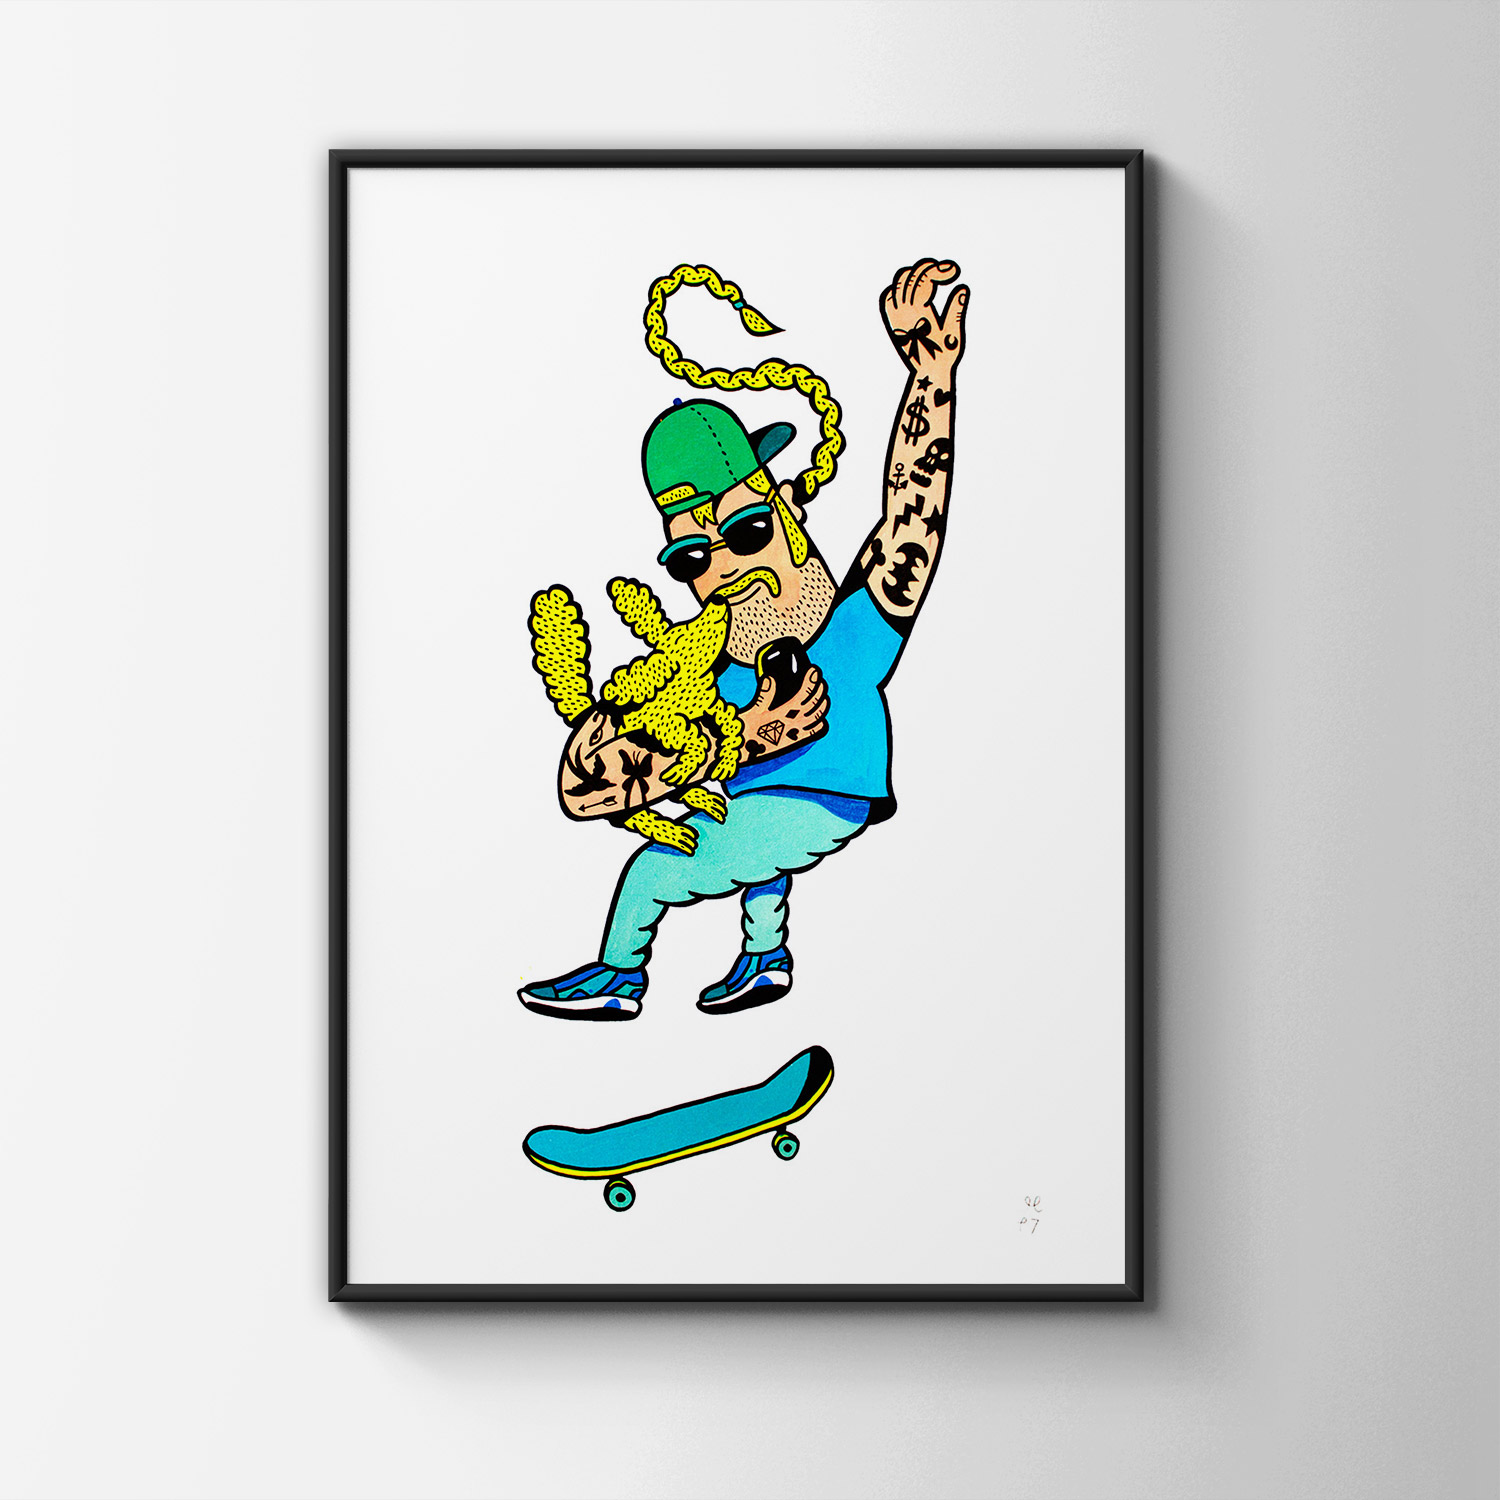 art-prints, gliceé, family-friendly, figurative, illustrative, minimalistic, portraiture, bodies, humor, sport, blue, green, turquoise, yellow, ink, paper, amusing, boys, contemporary-art, danish, decorative, design, interior, interior-design, men, modern, modern-art, nordic, pop-art, posters, scandinavien, Buy original high quality art. Paintings, drawings, limited edition prints & posters by talented artists.